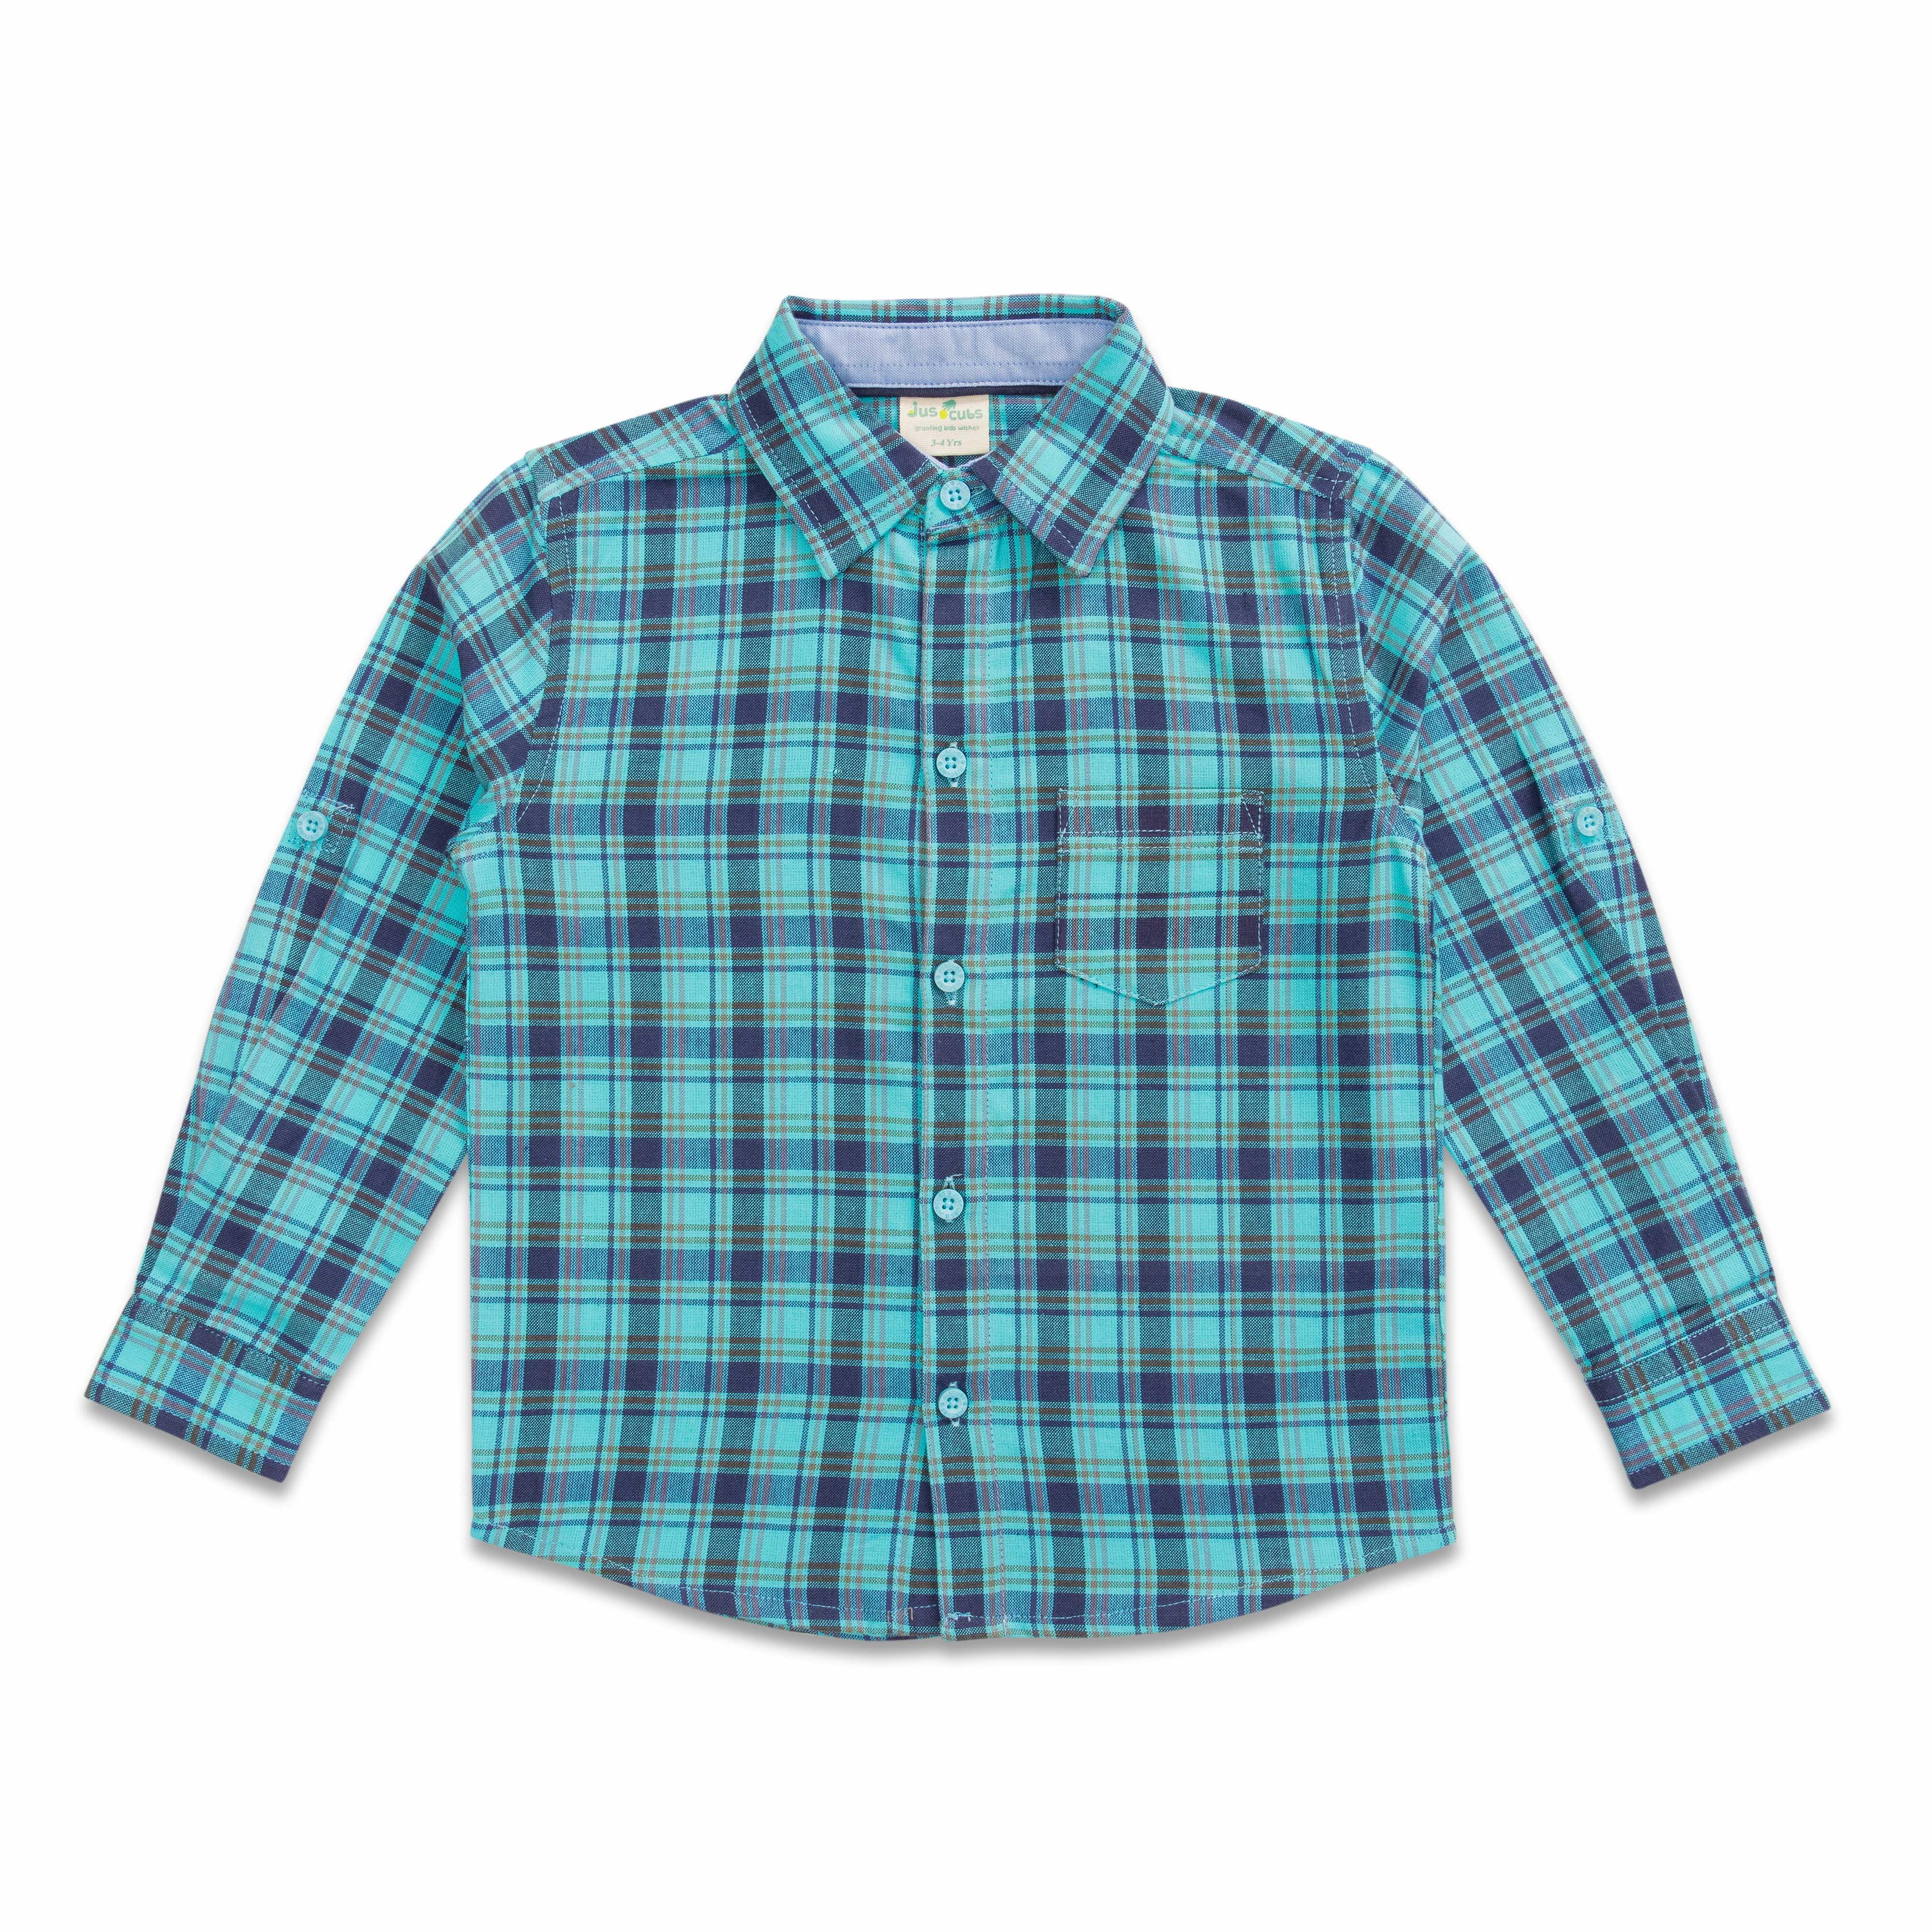 Young Boys Full Sleeve Checked Shirt - Juscubs